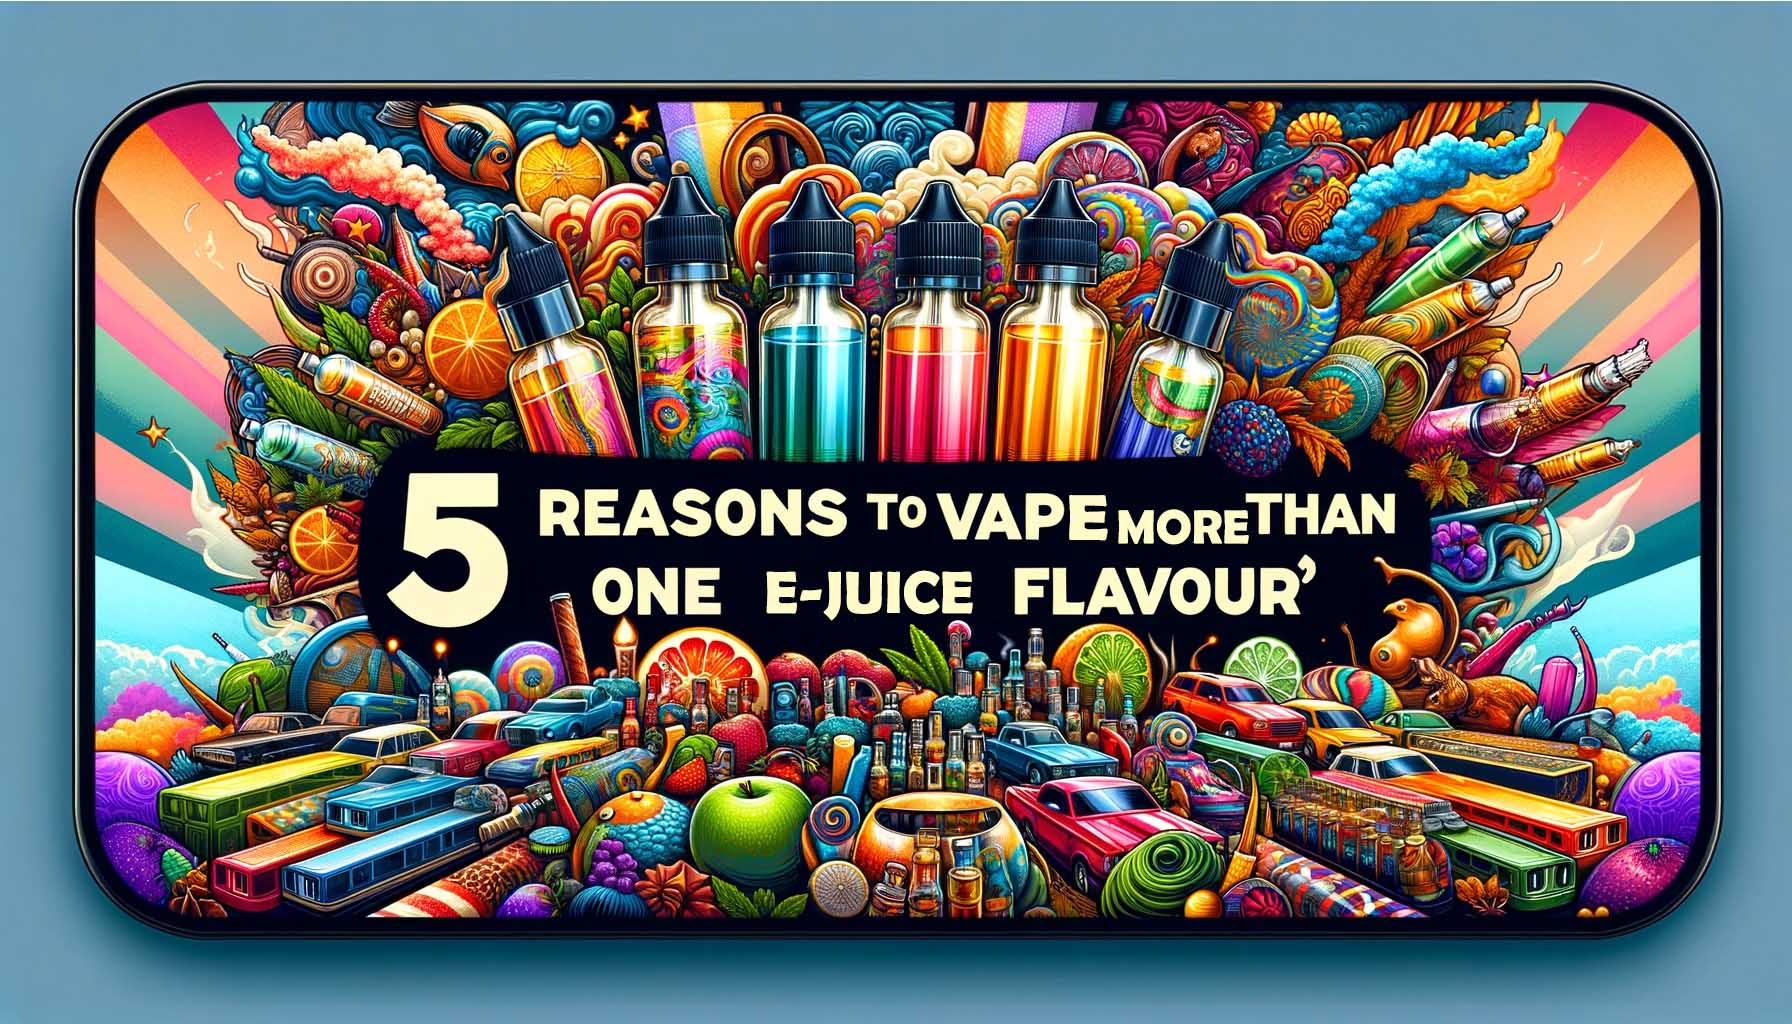 5 Reasons To Vape More Than One E-Juice Flavour